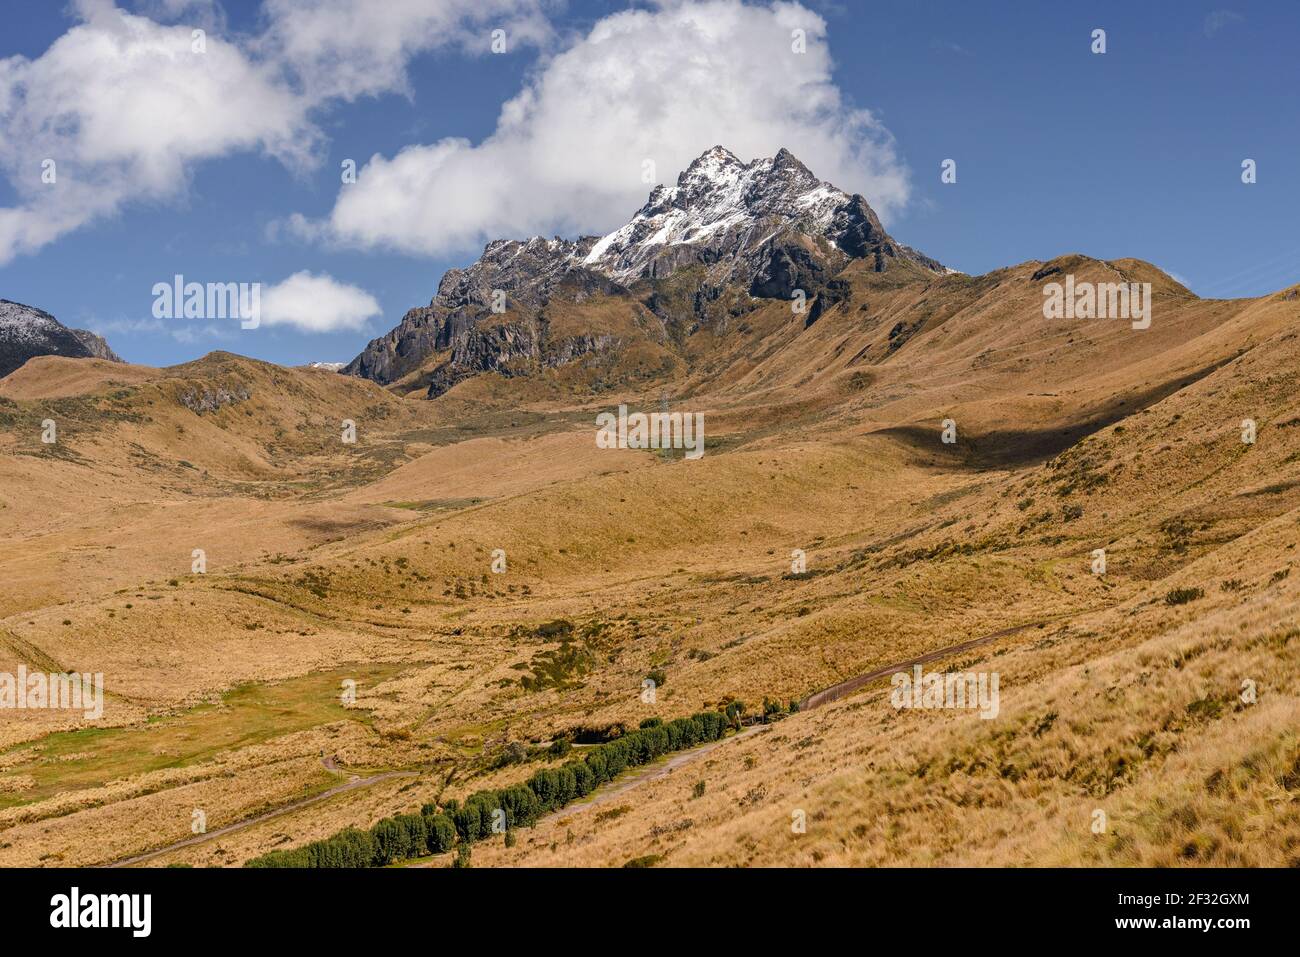 Andean paramo on the hiking way to the summit of snow-capped Pichincha volcano on sunny day. A short hike takes you into wild and serene Andean moors. Stock Photo